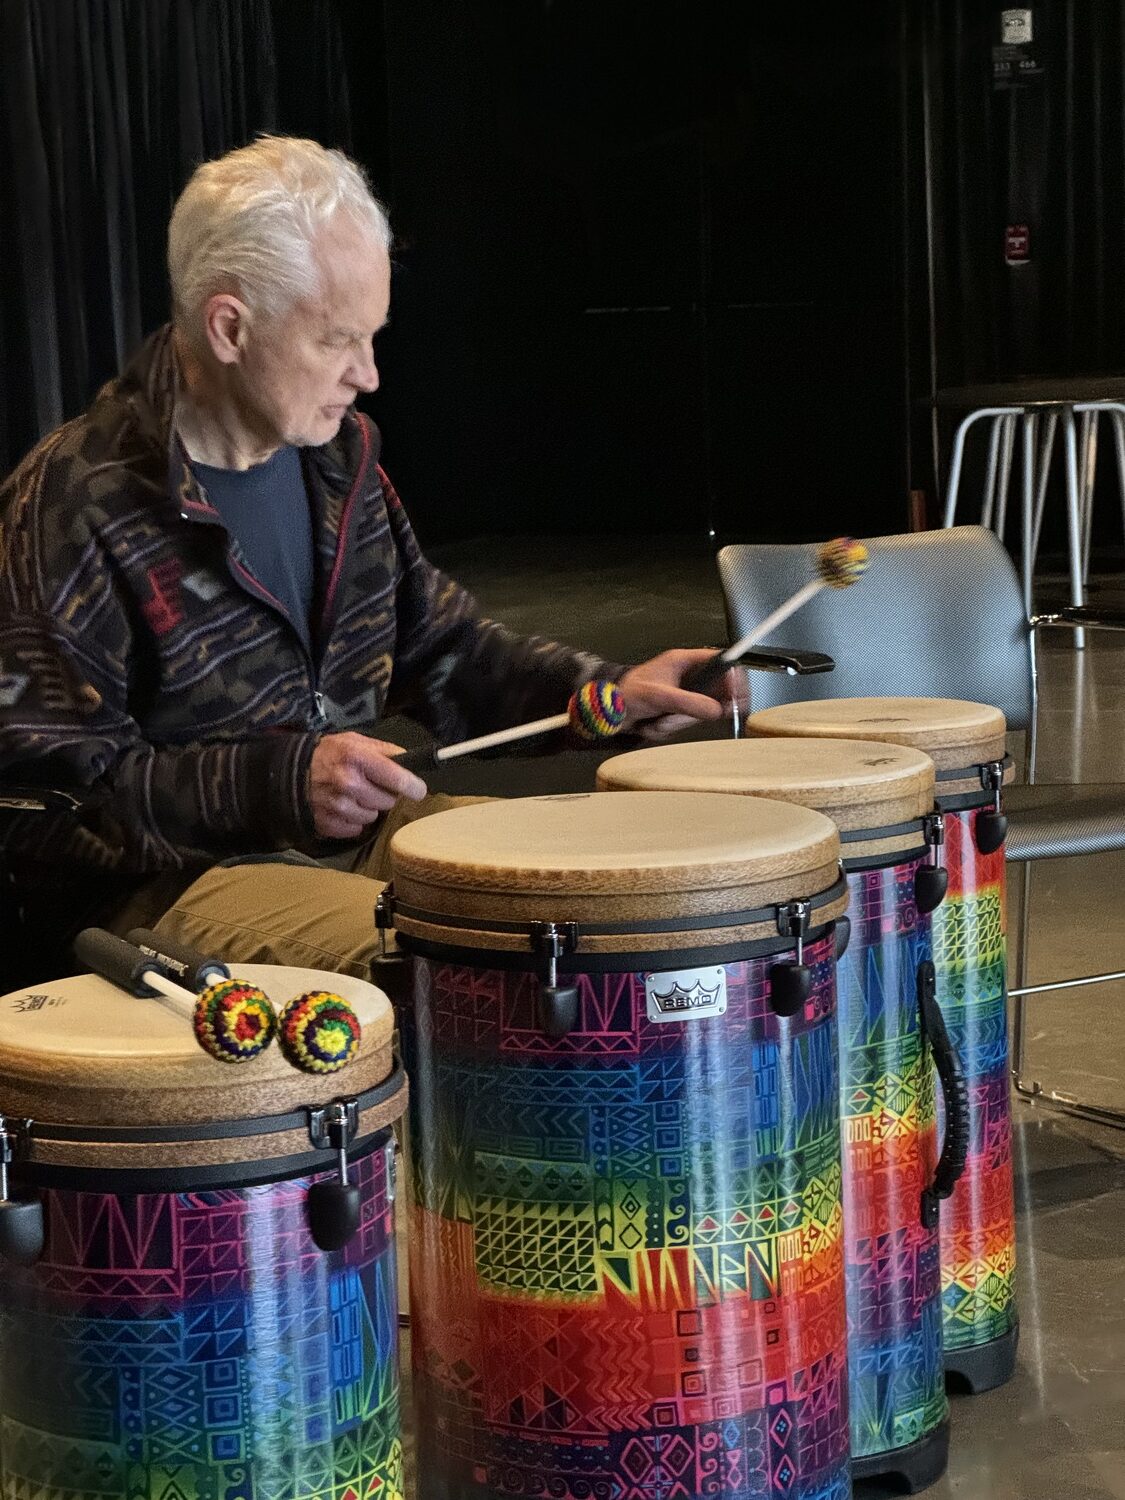 Drumming for Parkinson's was a hit at the Parrish Art Museum in Water Mill. SARAH COHEN